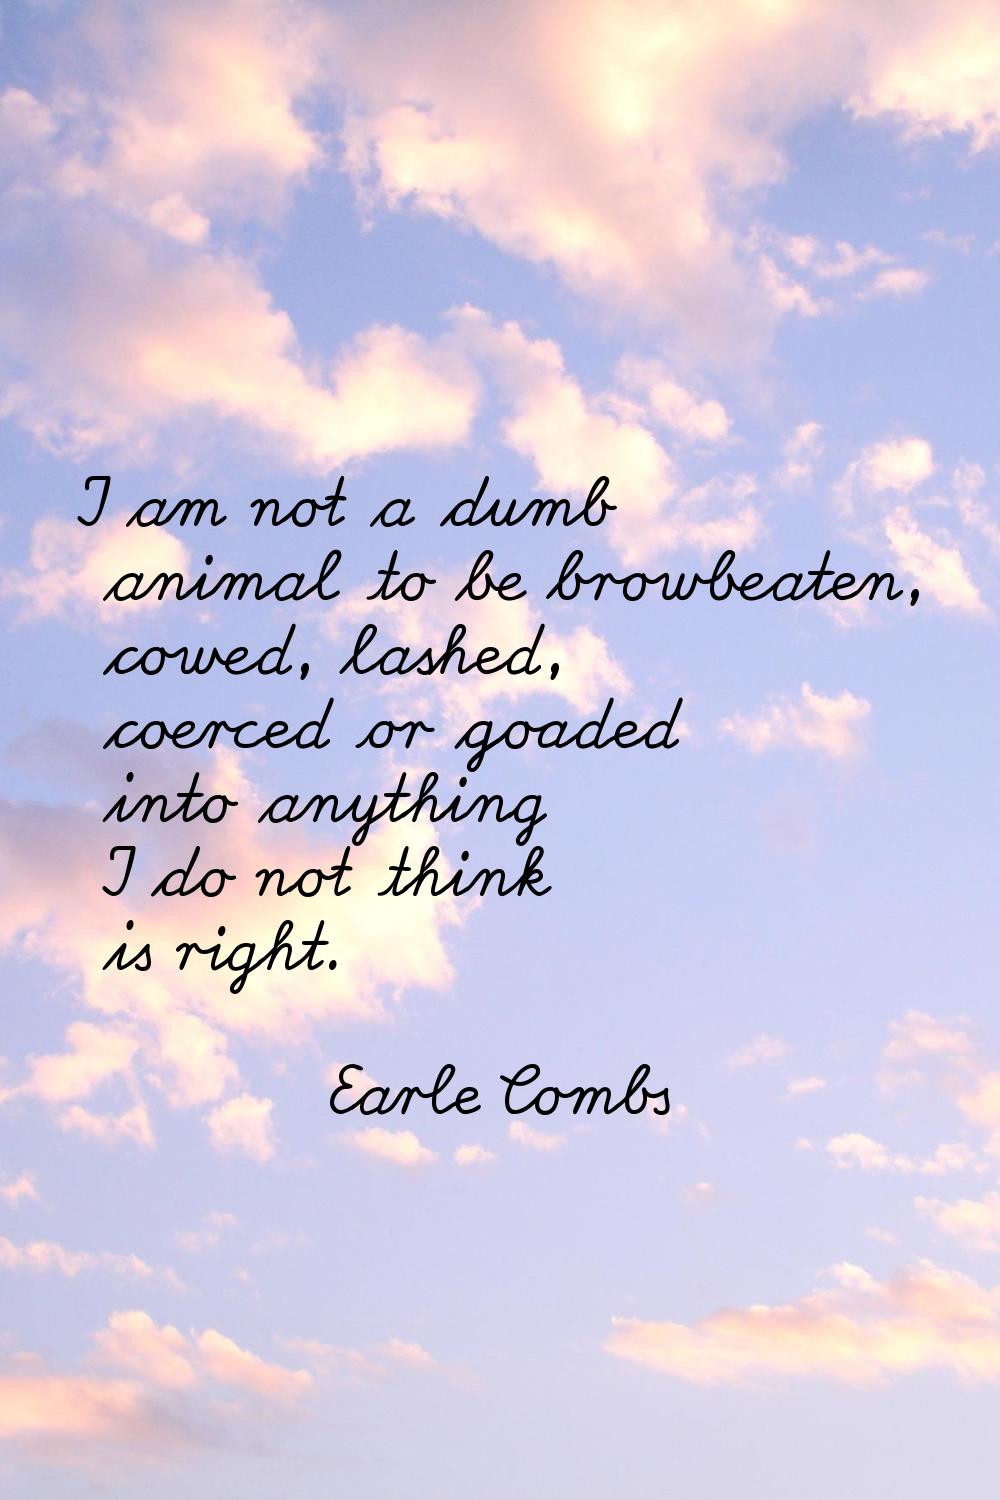 I am not a dumb animal to be browbeaten, cowed, lashed, coerced or goaded into anything I do not th